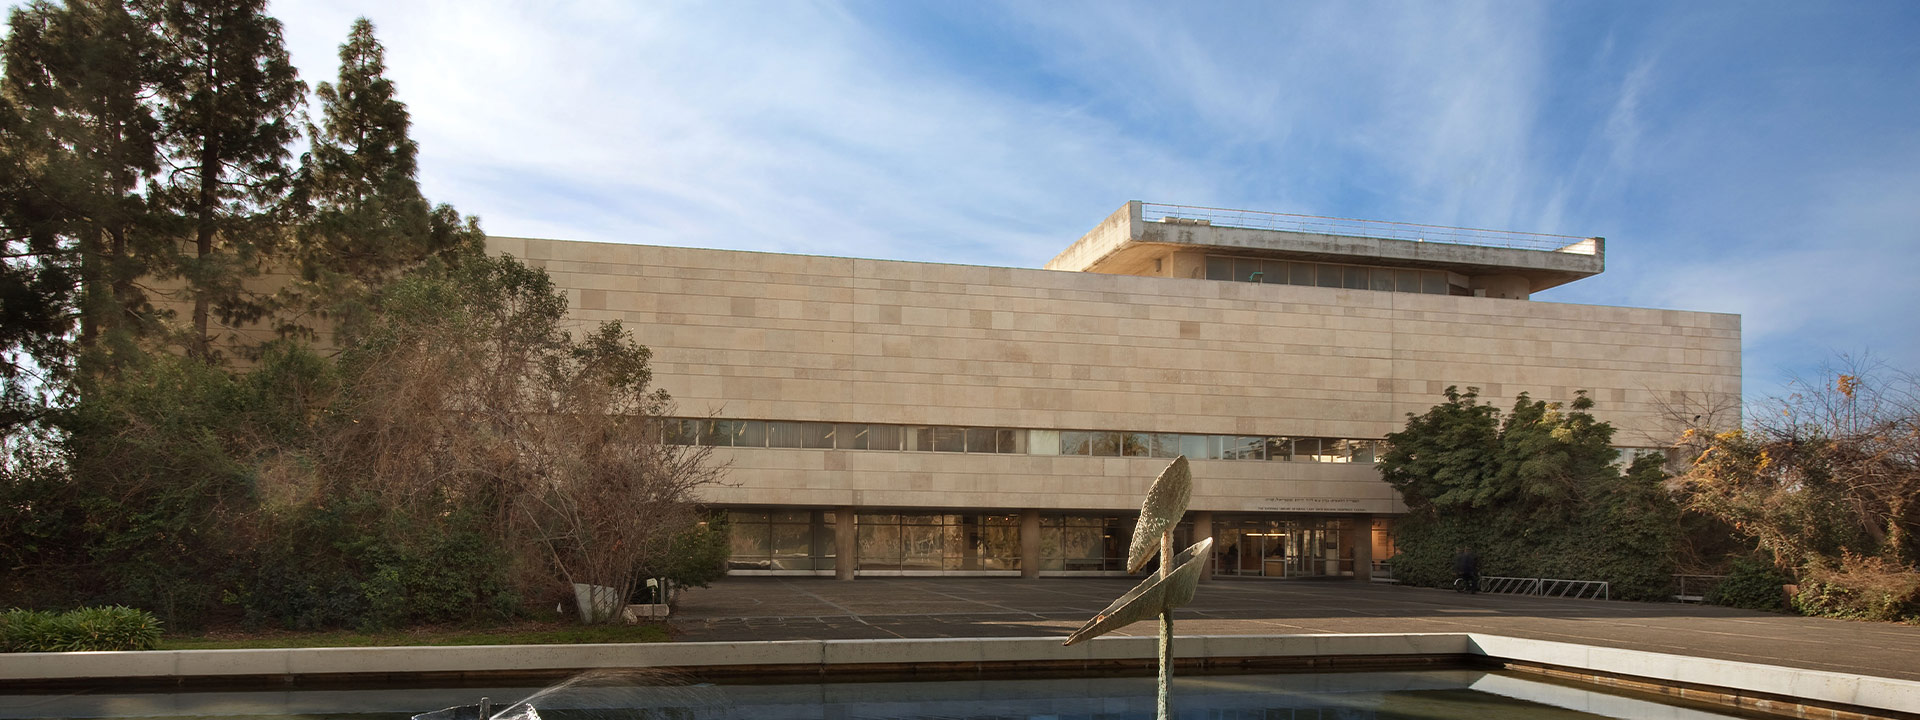 Privacy Policy | The National Library of Israel